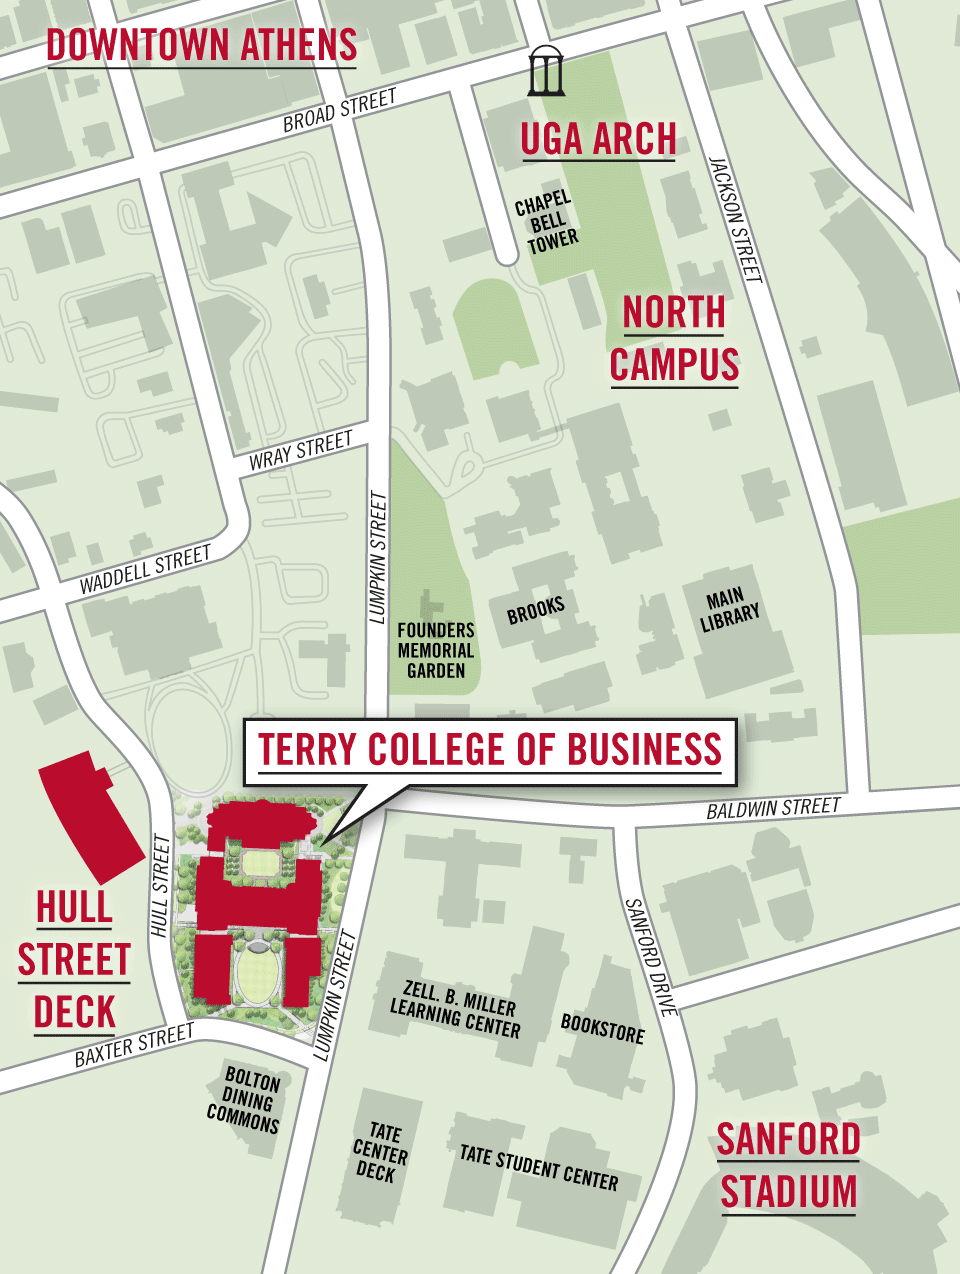 Map of downtown Athens and the Terry College of Business